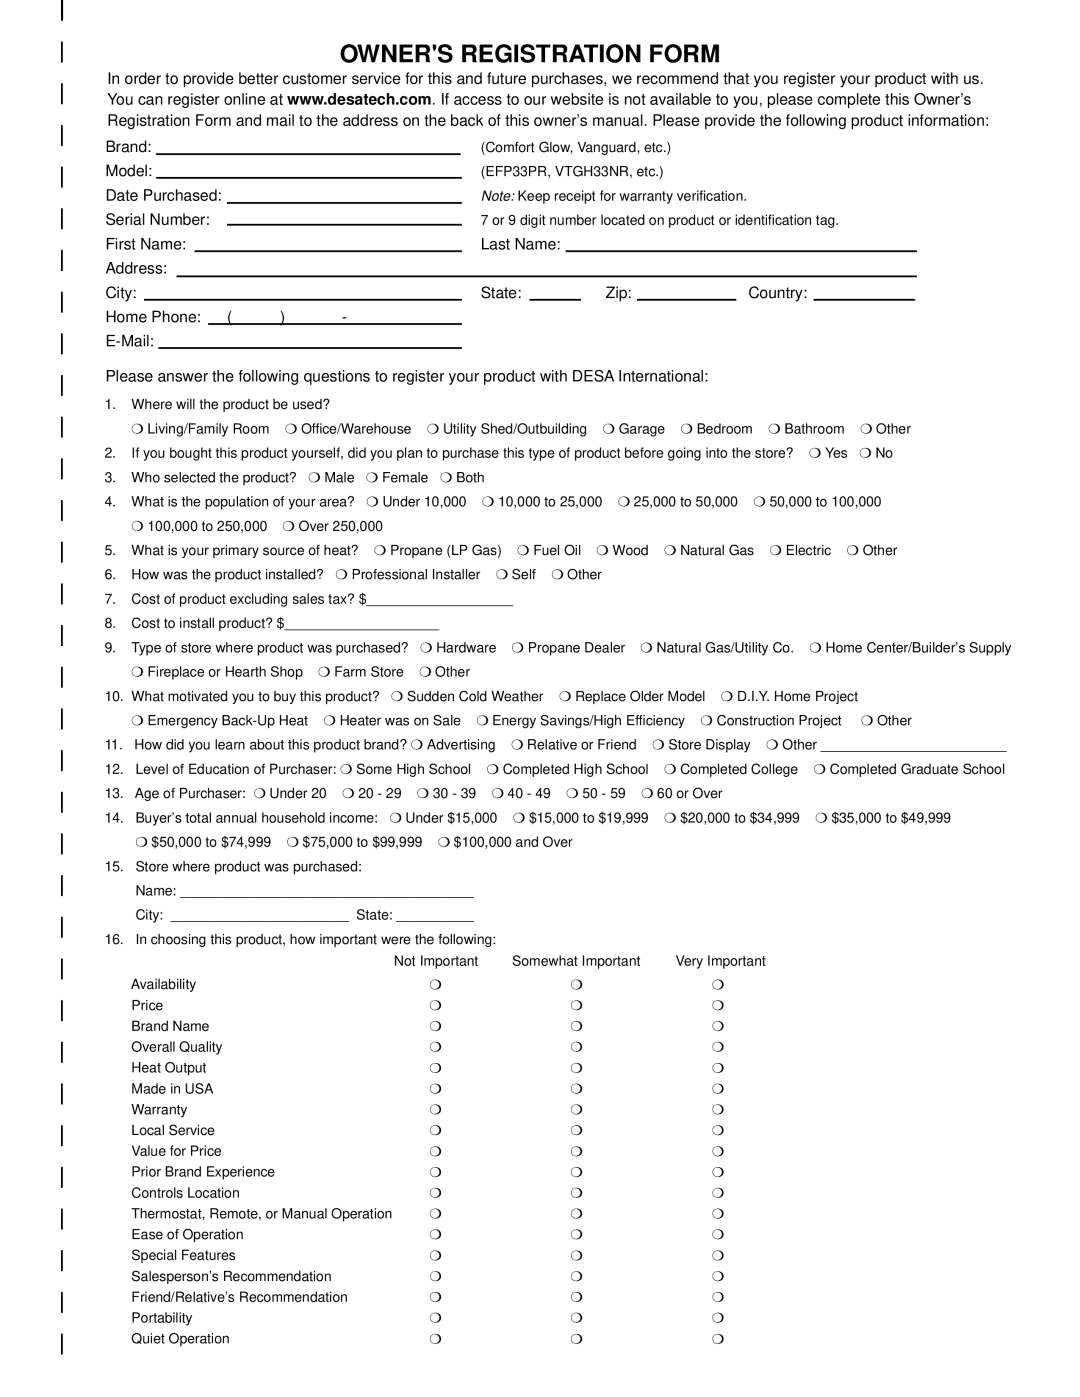 Desa CGS3124P installation manual Owners Registration Form 